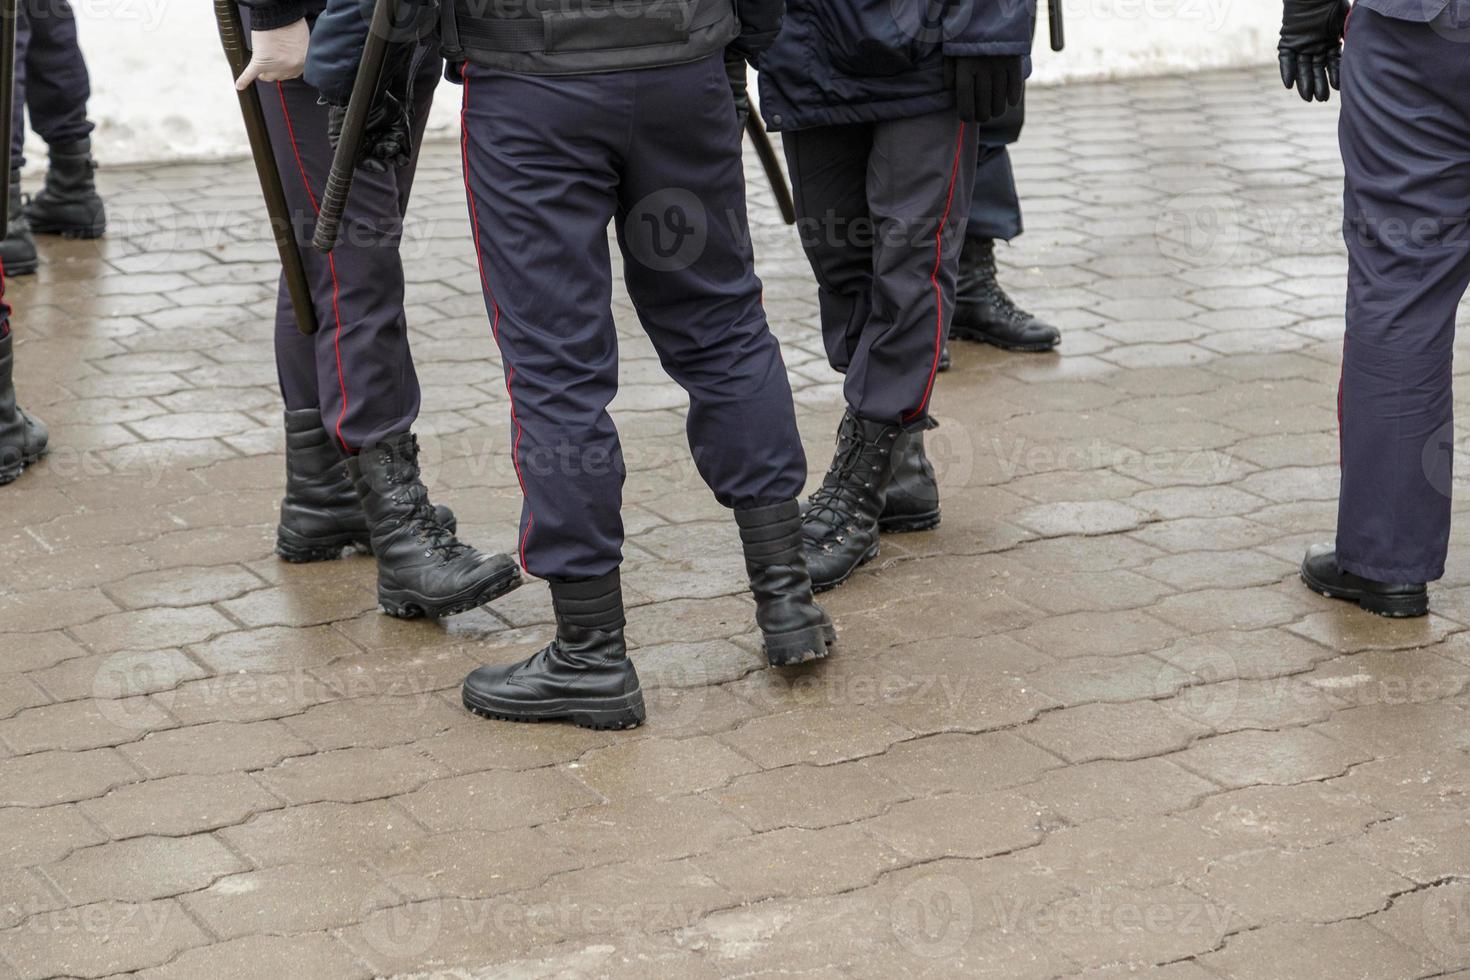 Russian police officers legs in black ankle boots, red stripe pants and with rubber tonfa night sticks. photo